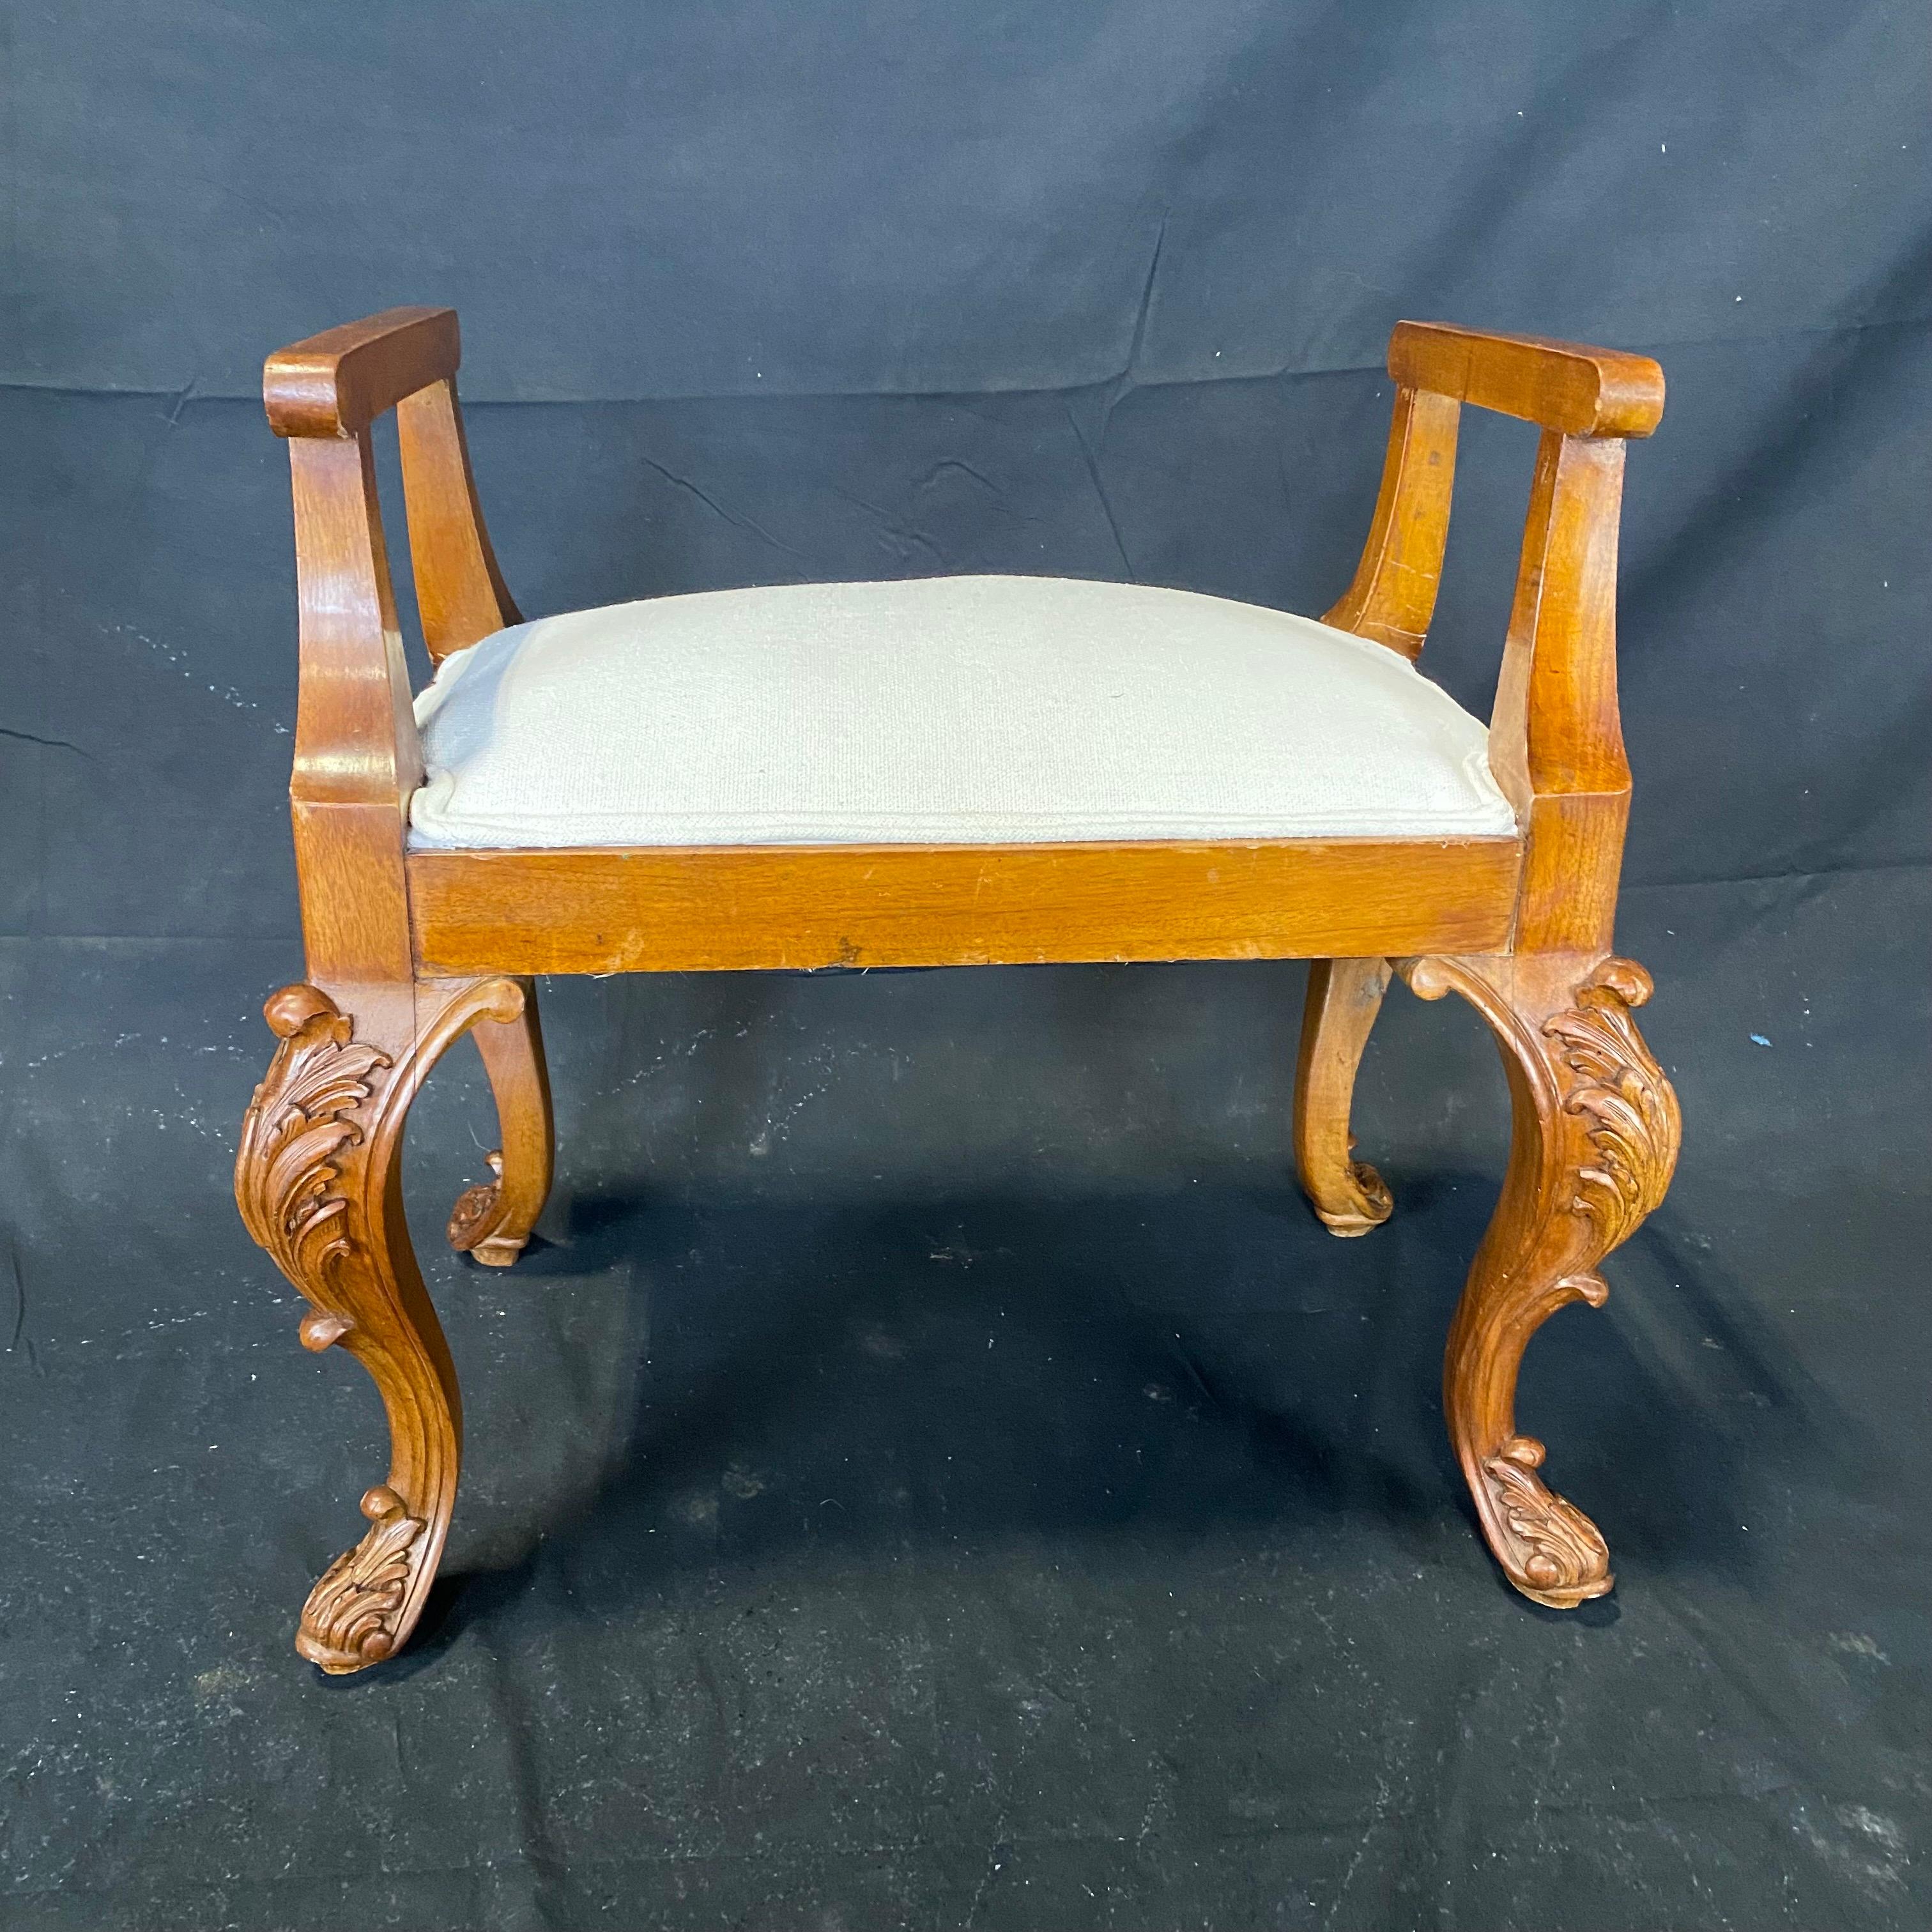 Newly reupholstered in a beautiful linen cotton blend, this lovely French walnut chair and ottoman set displays classic Louis XV hand carved detail. Can be used separately or together, but creates a lovely low profile comfortable chaise like